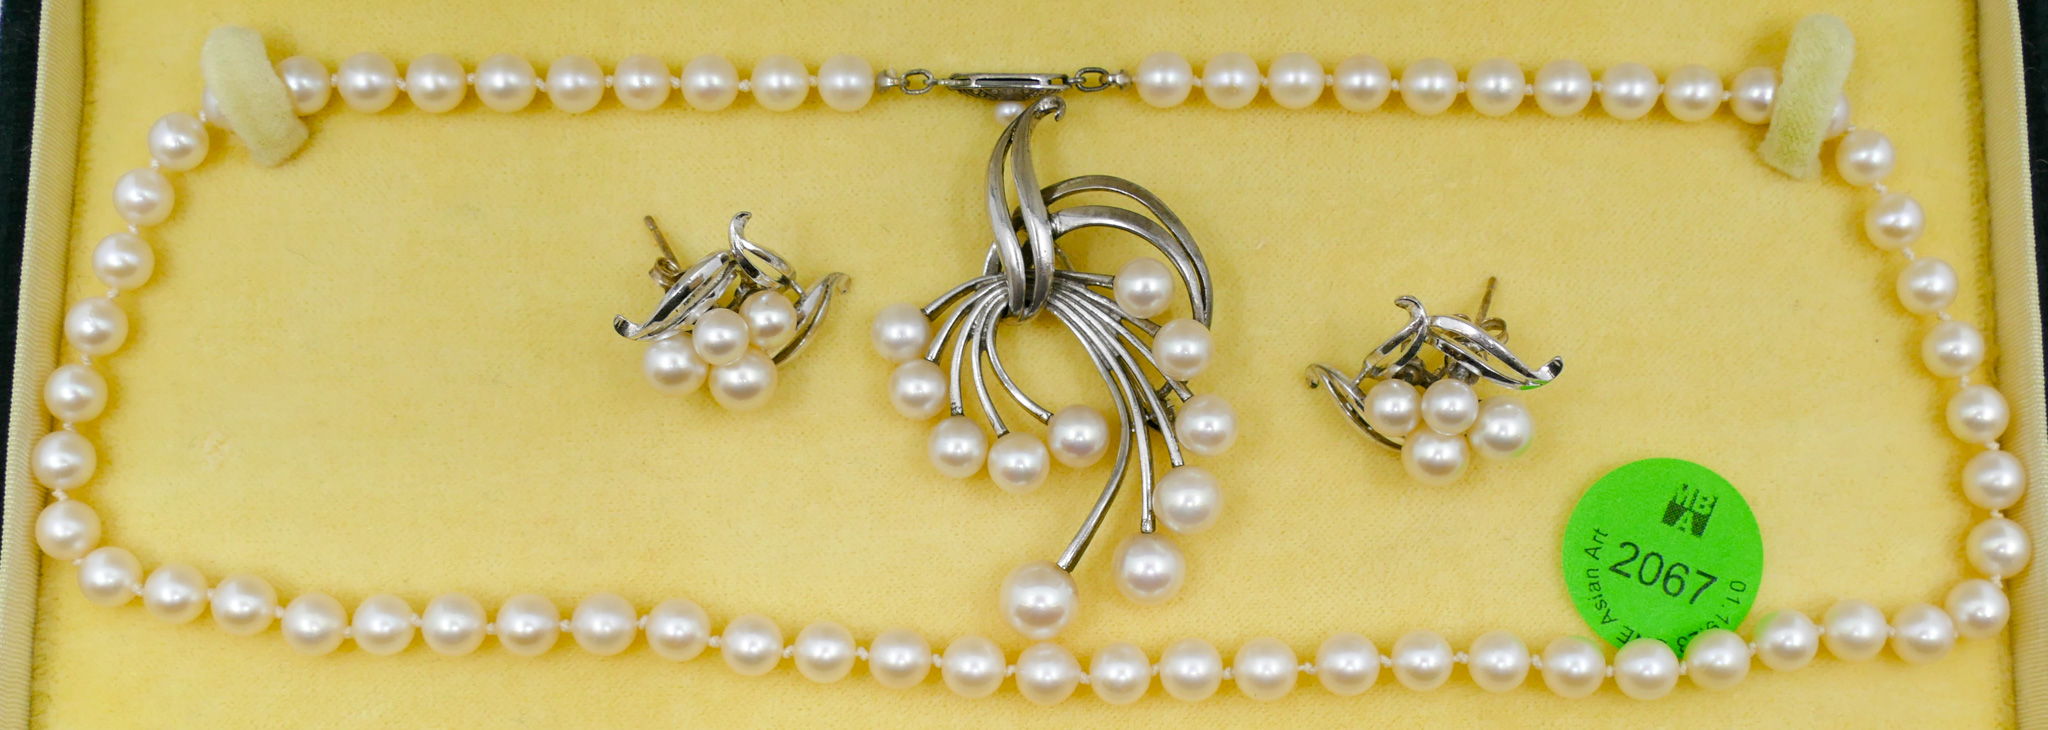 3pc Vintage Mikimoto Pearl Sterling